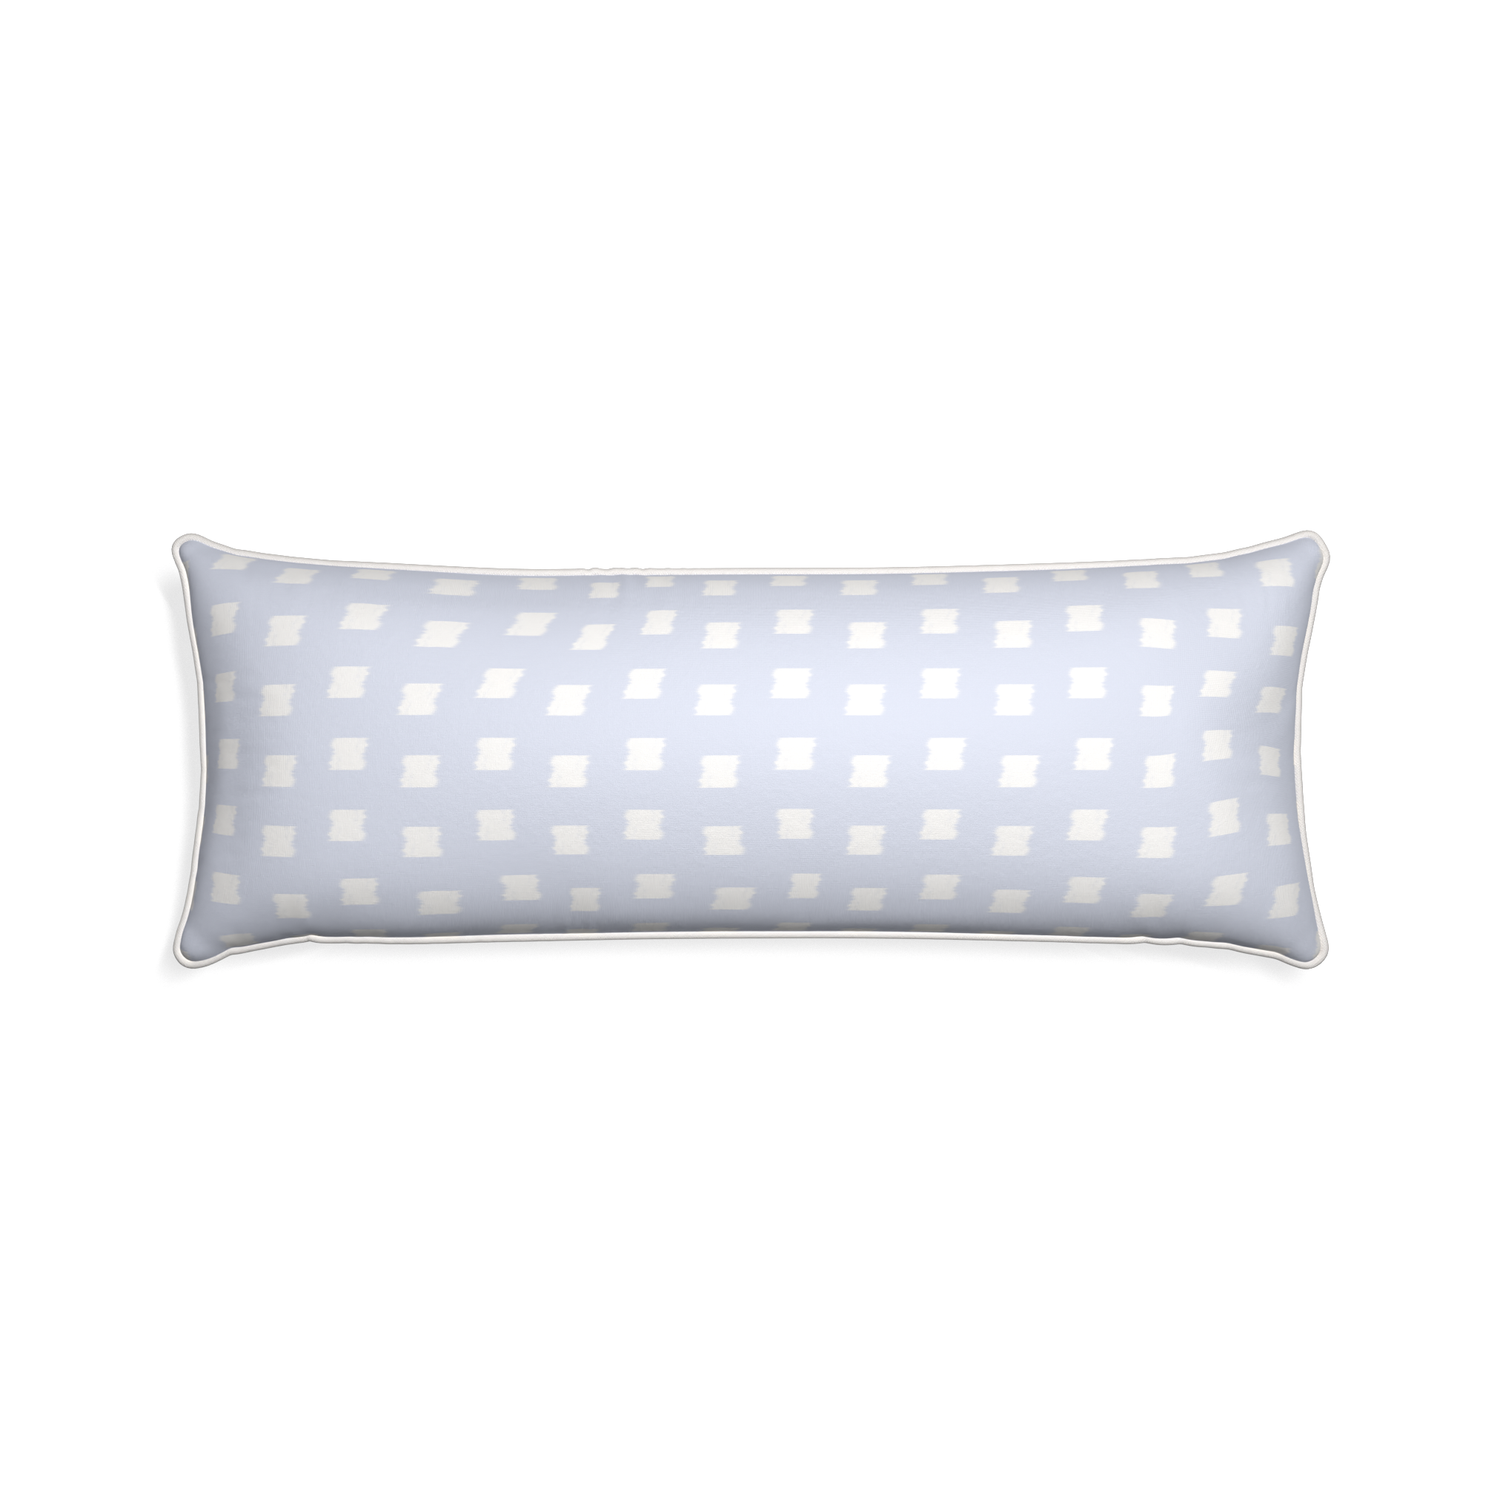 Xl-lumbar denton custom sky blue patternpillow with snow piping on white background